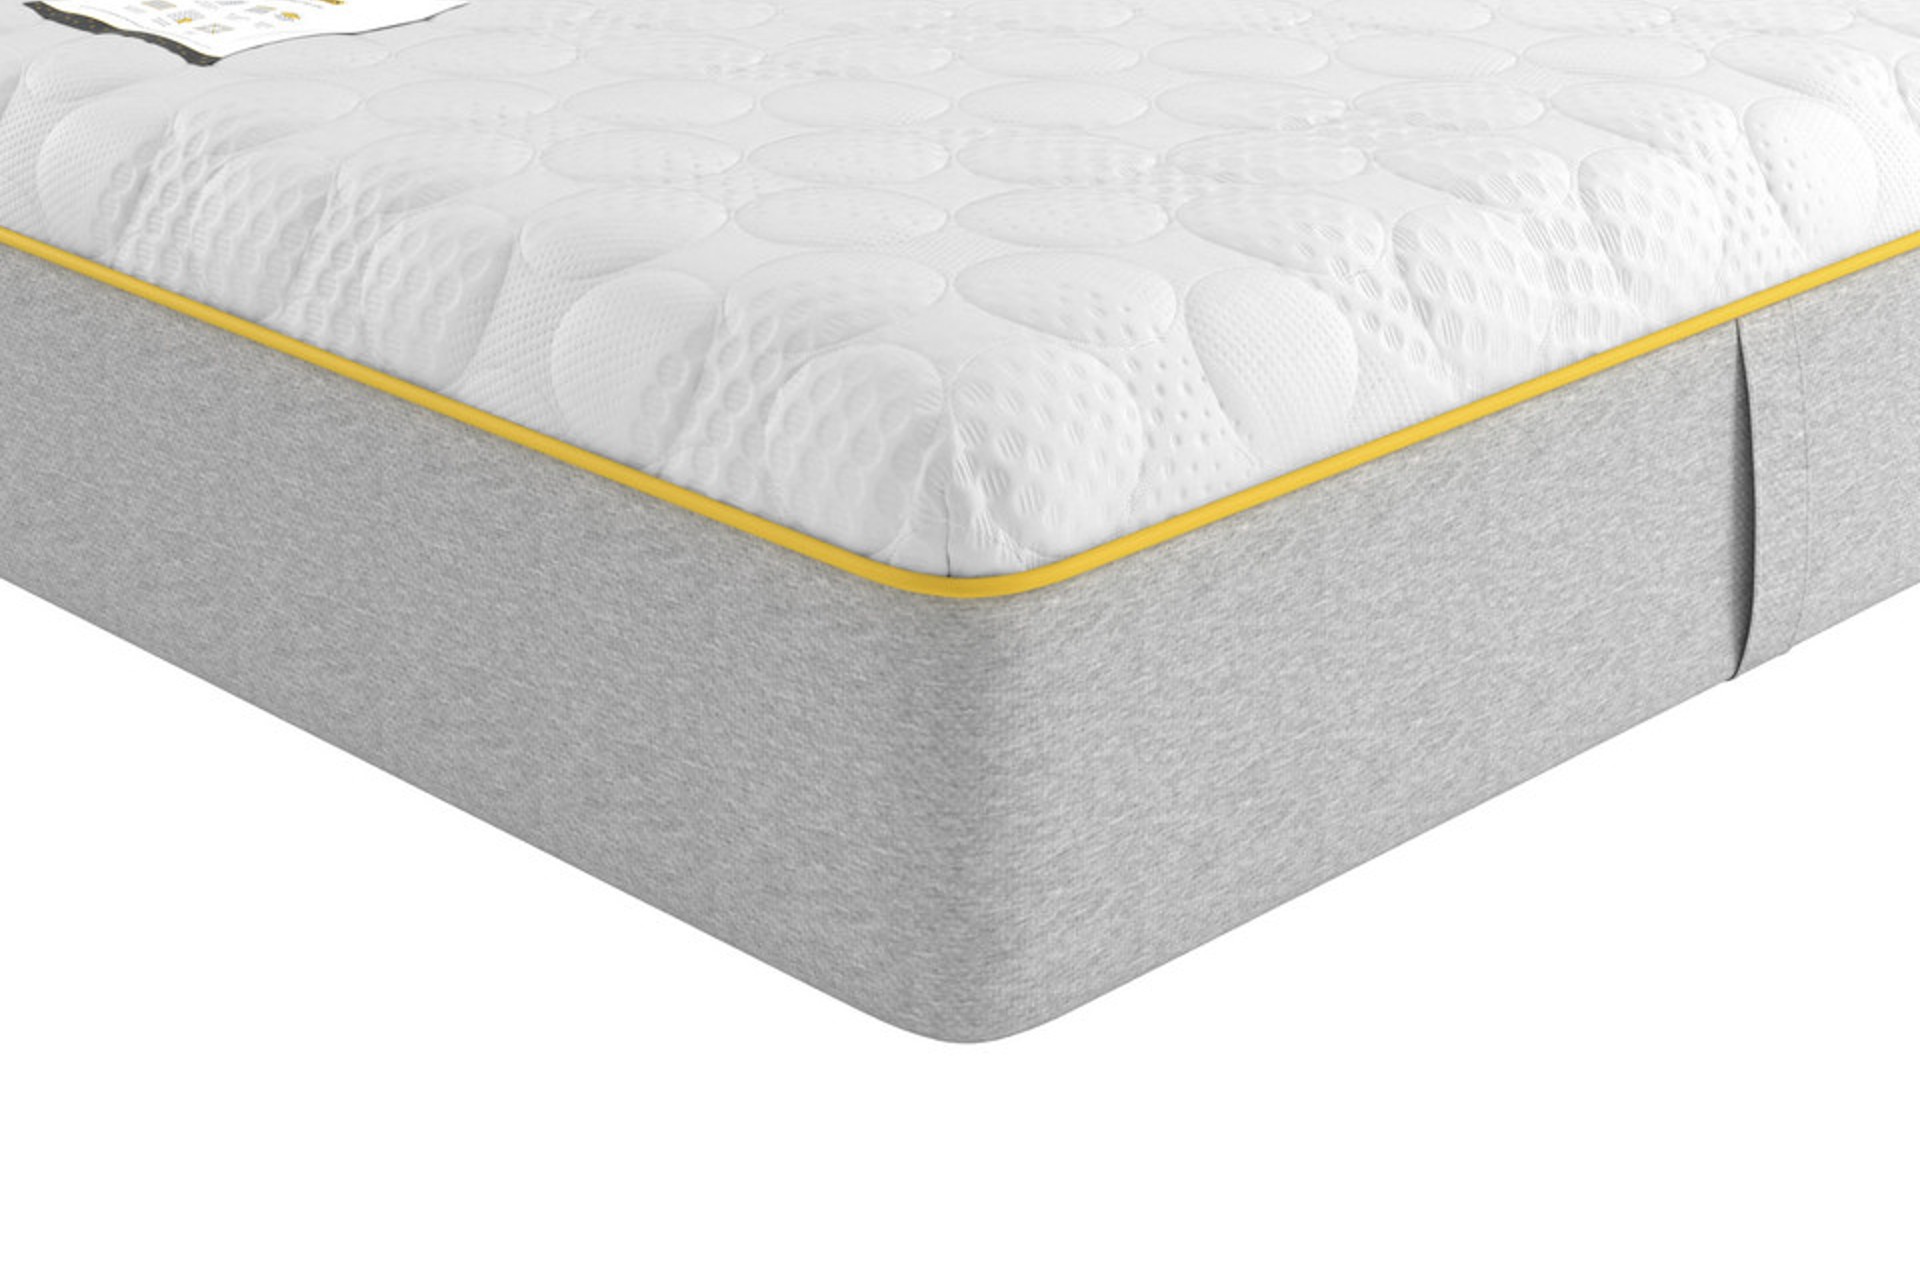 eve hybrid duo plus mattress - a rolled hybrid mattress available with fast delivery